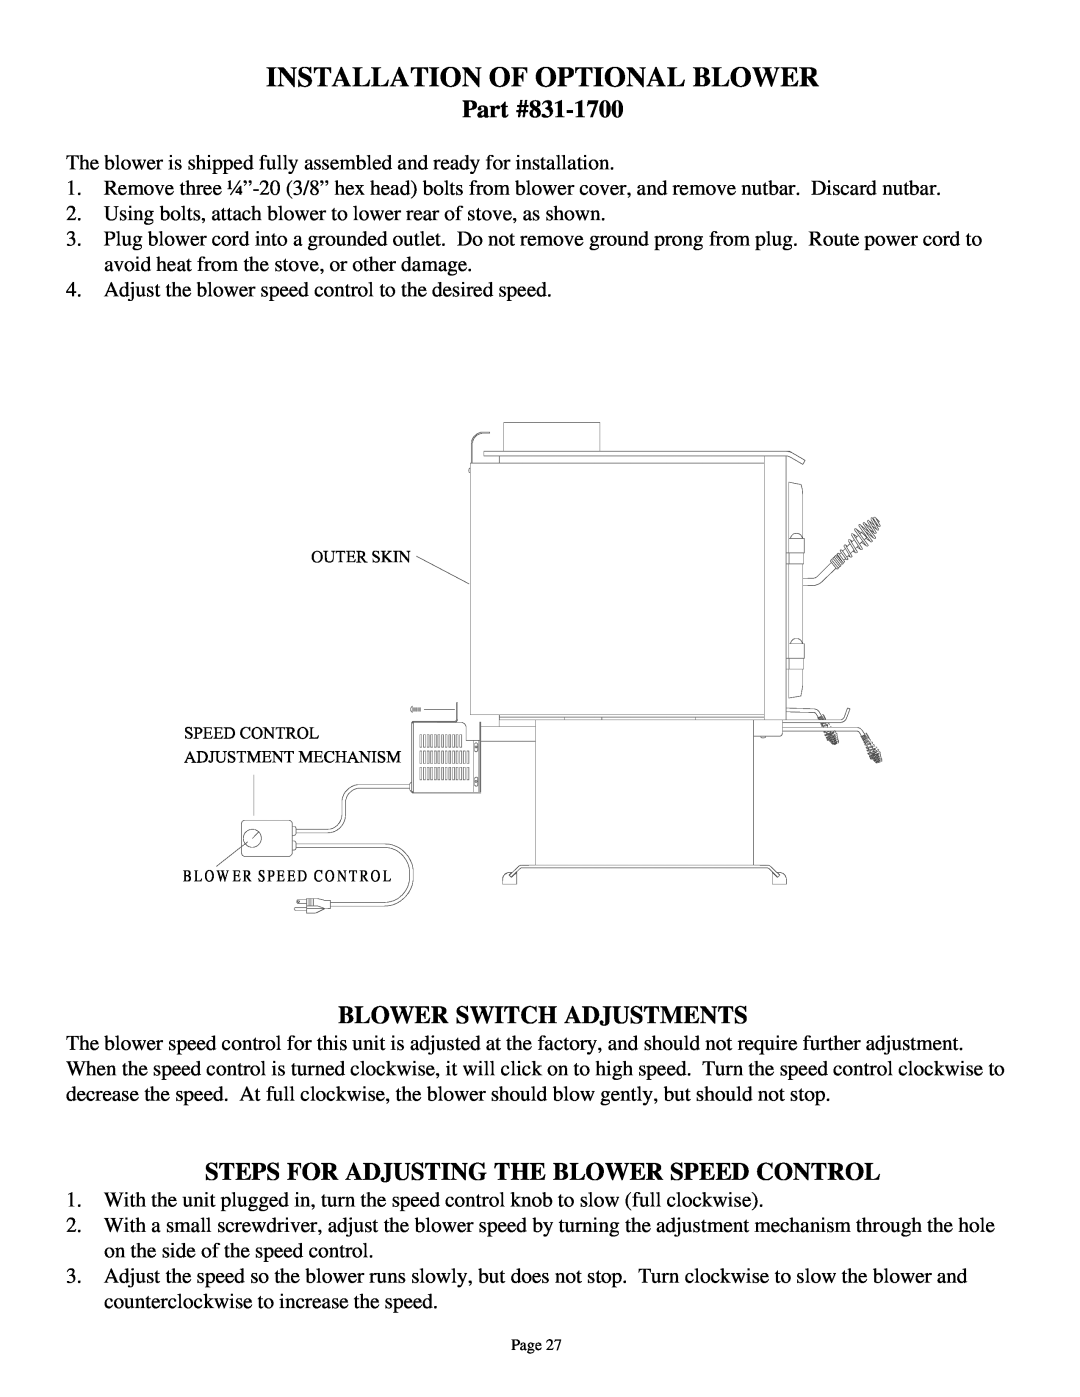 Quadra-Fire 3100 owner manual Installation Of Optional Blower, 831-1700, Blower Switch Adjustments 